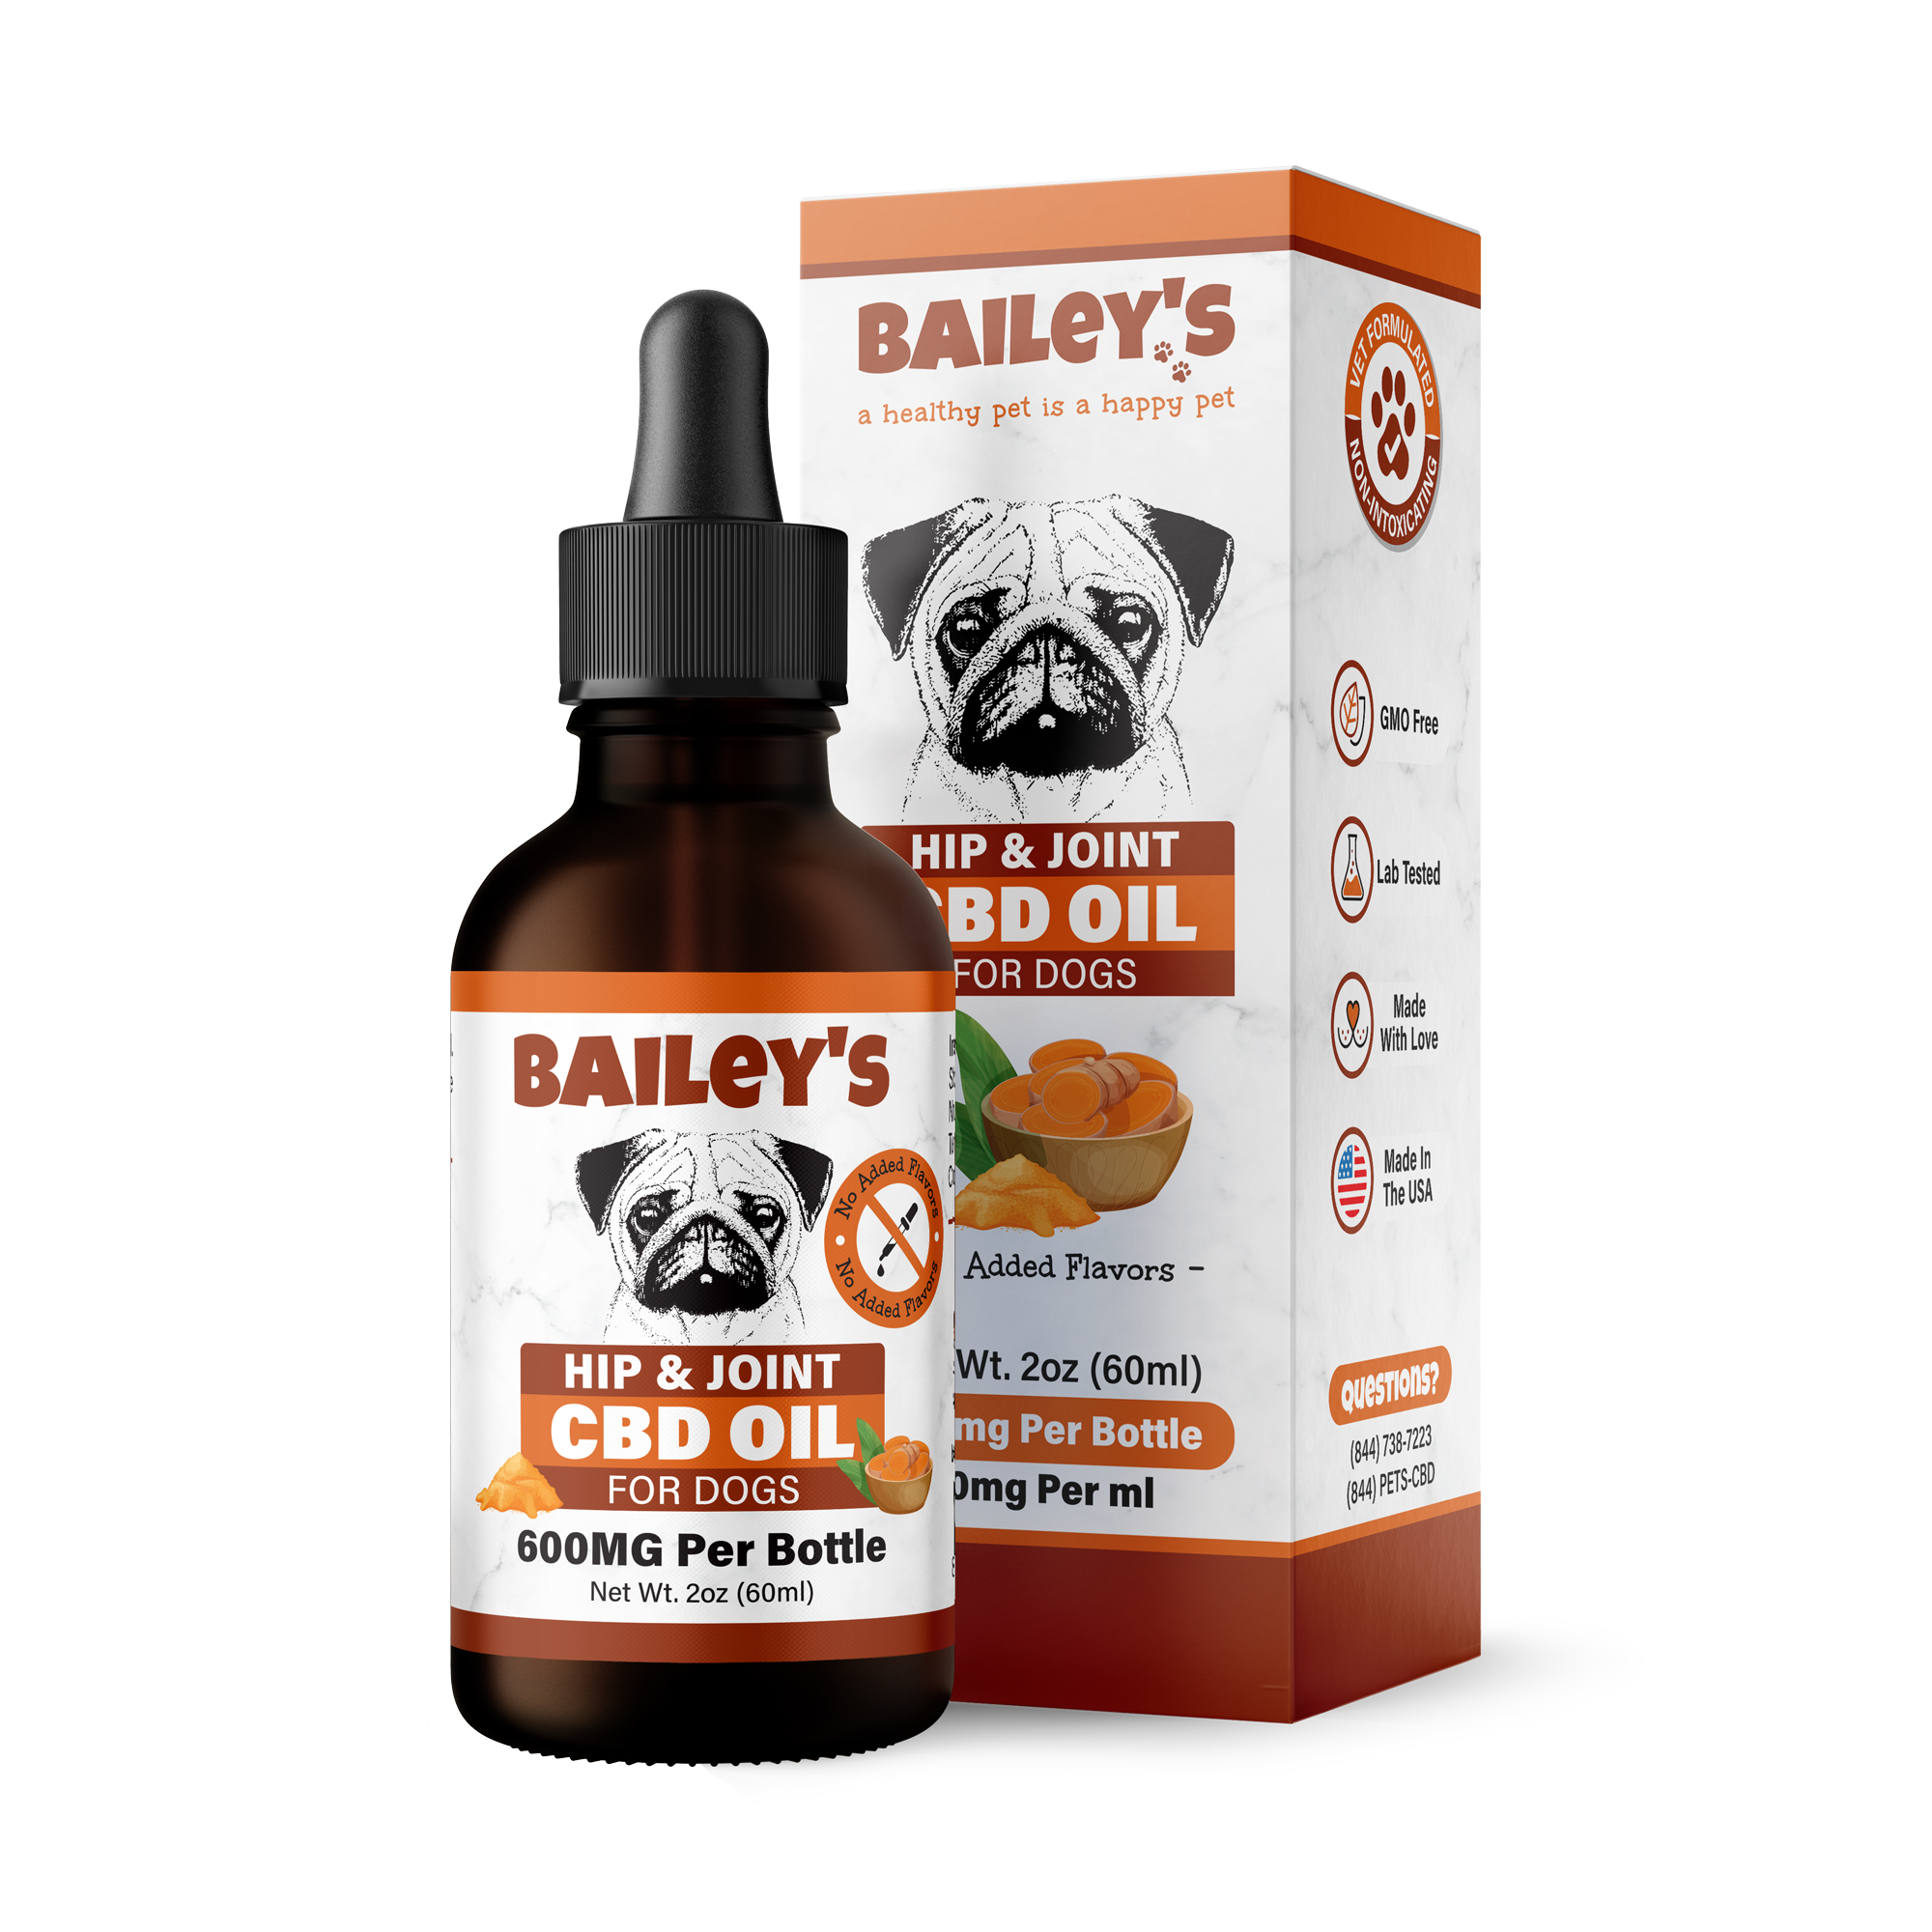 Hip & Joint CBD Oil For Dogs 600mg